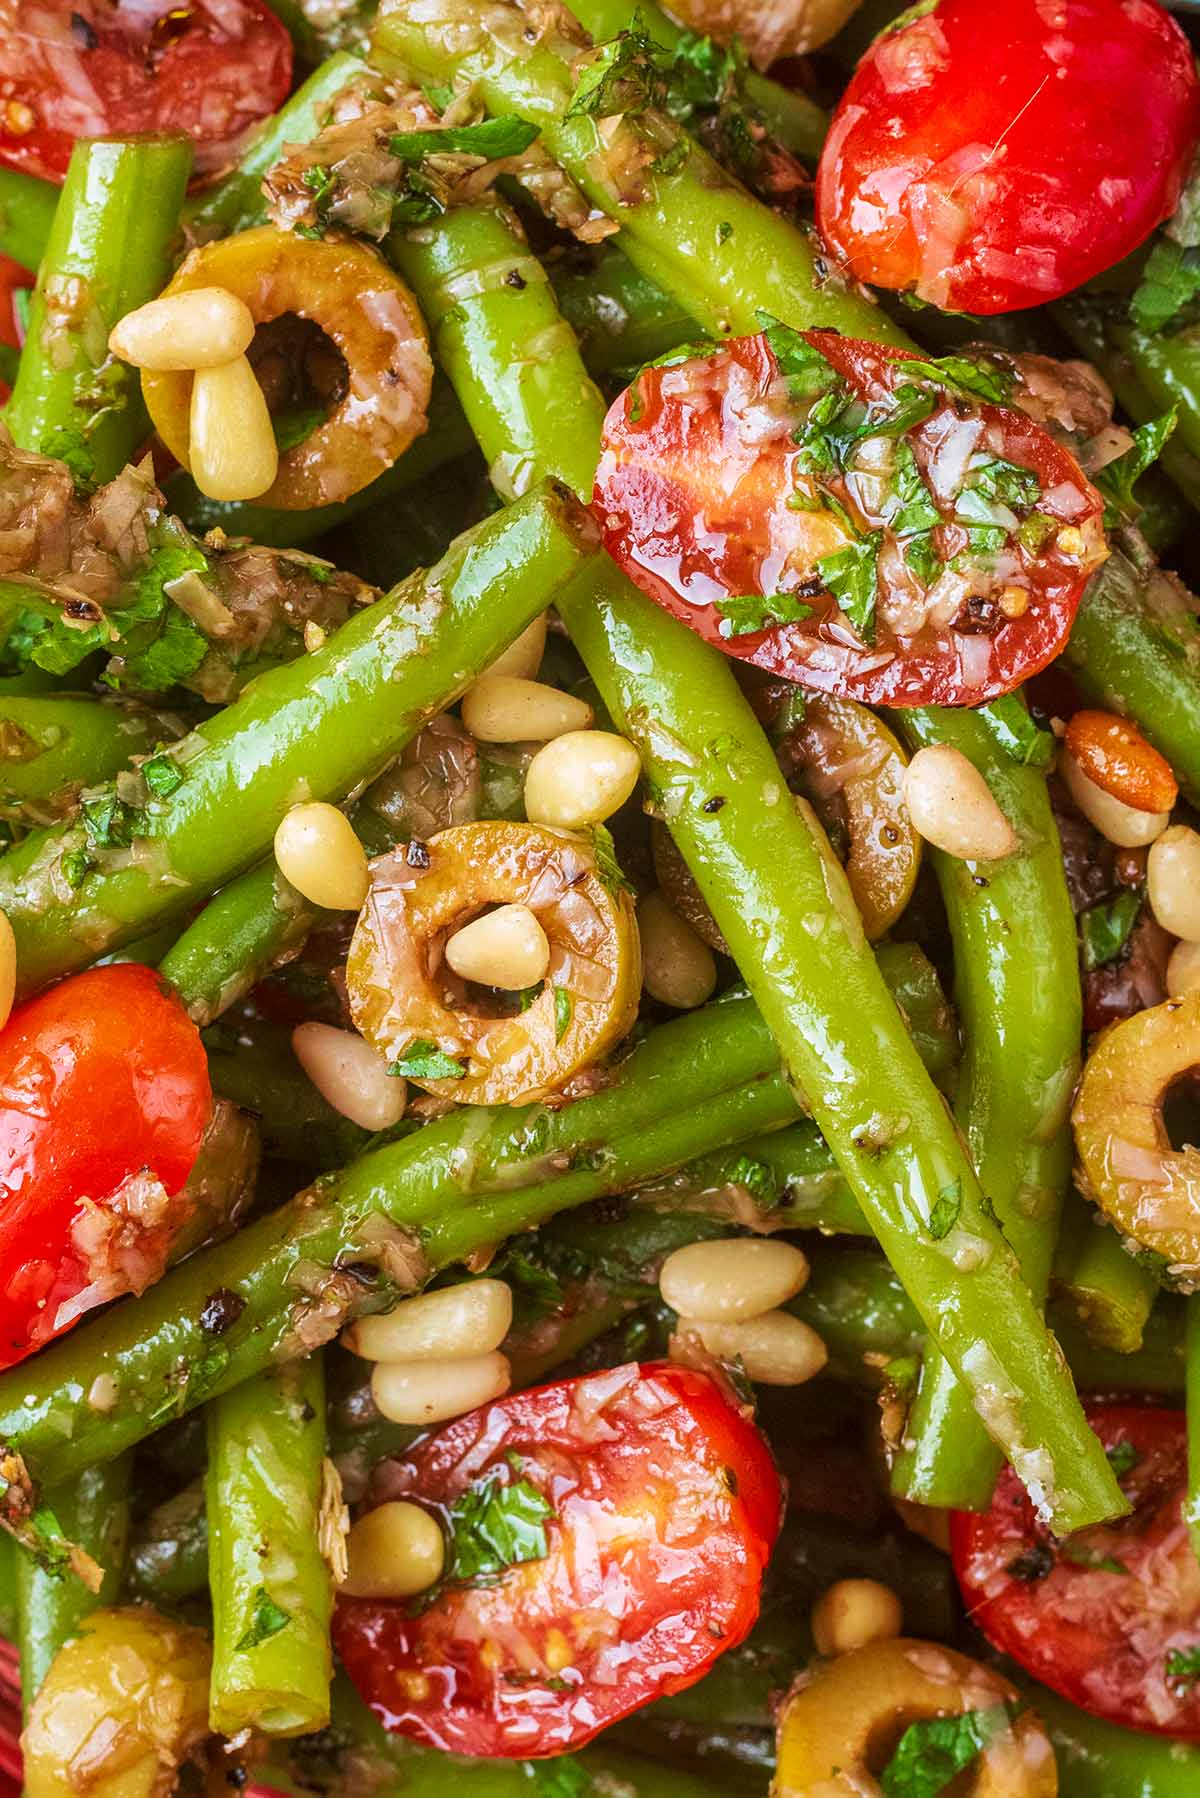 Green beans, olives and cherry tomatoes mixed with a dressing and topped with pine nuts.